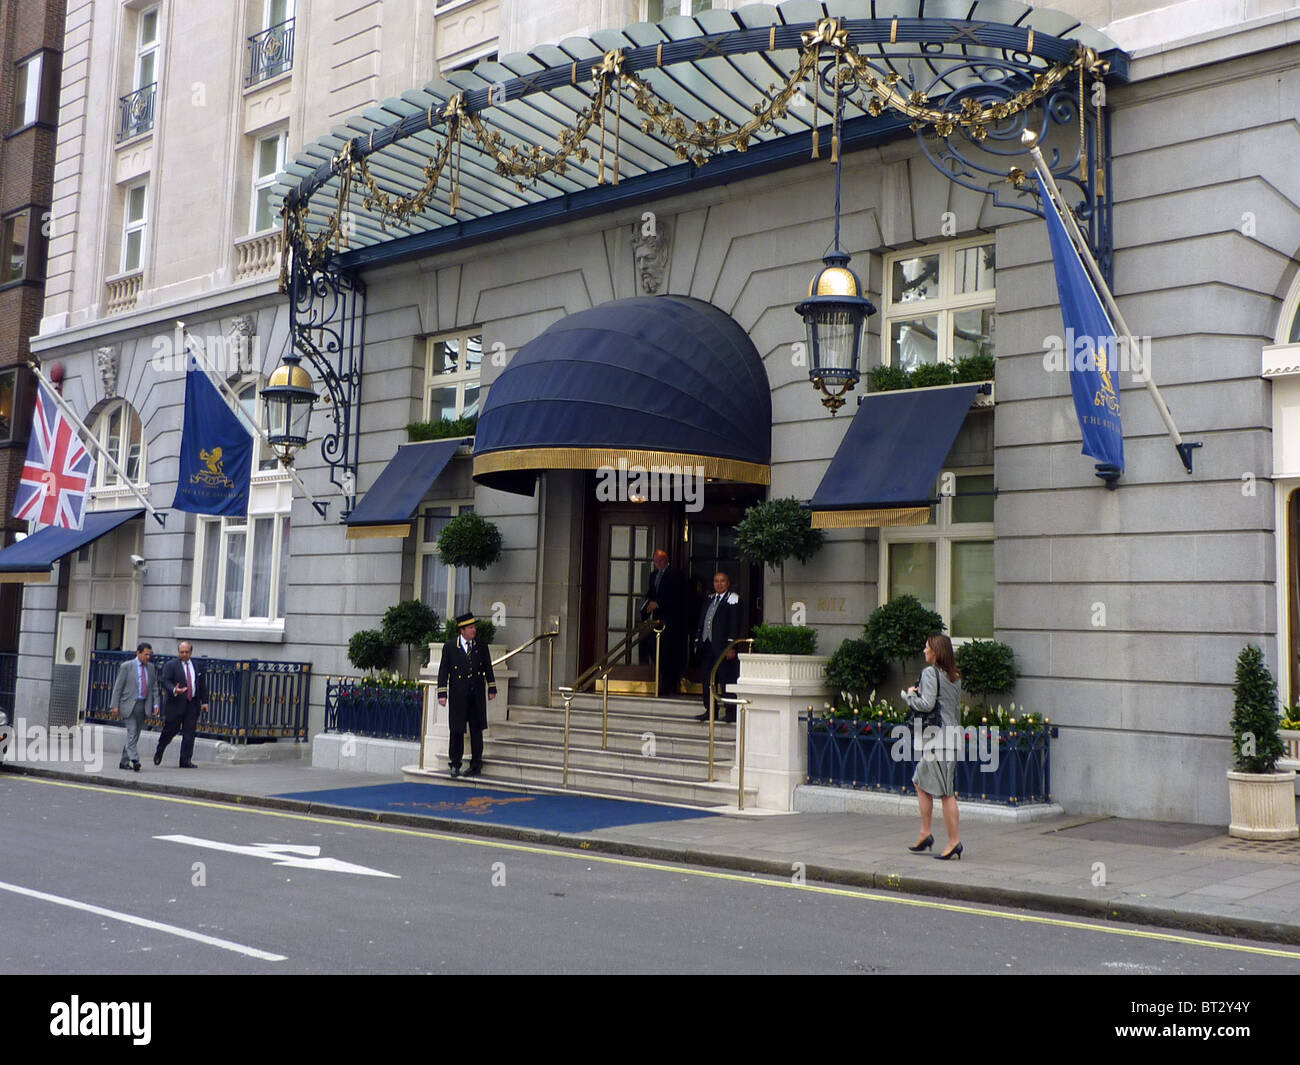 The famous Ritz Hotel in central London. Stock Photo